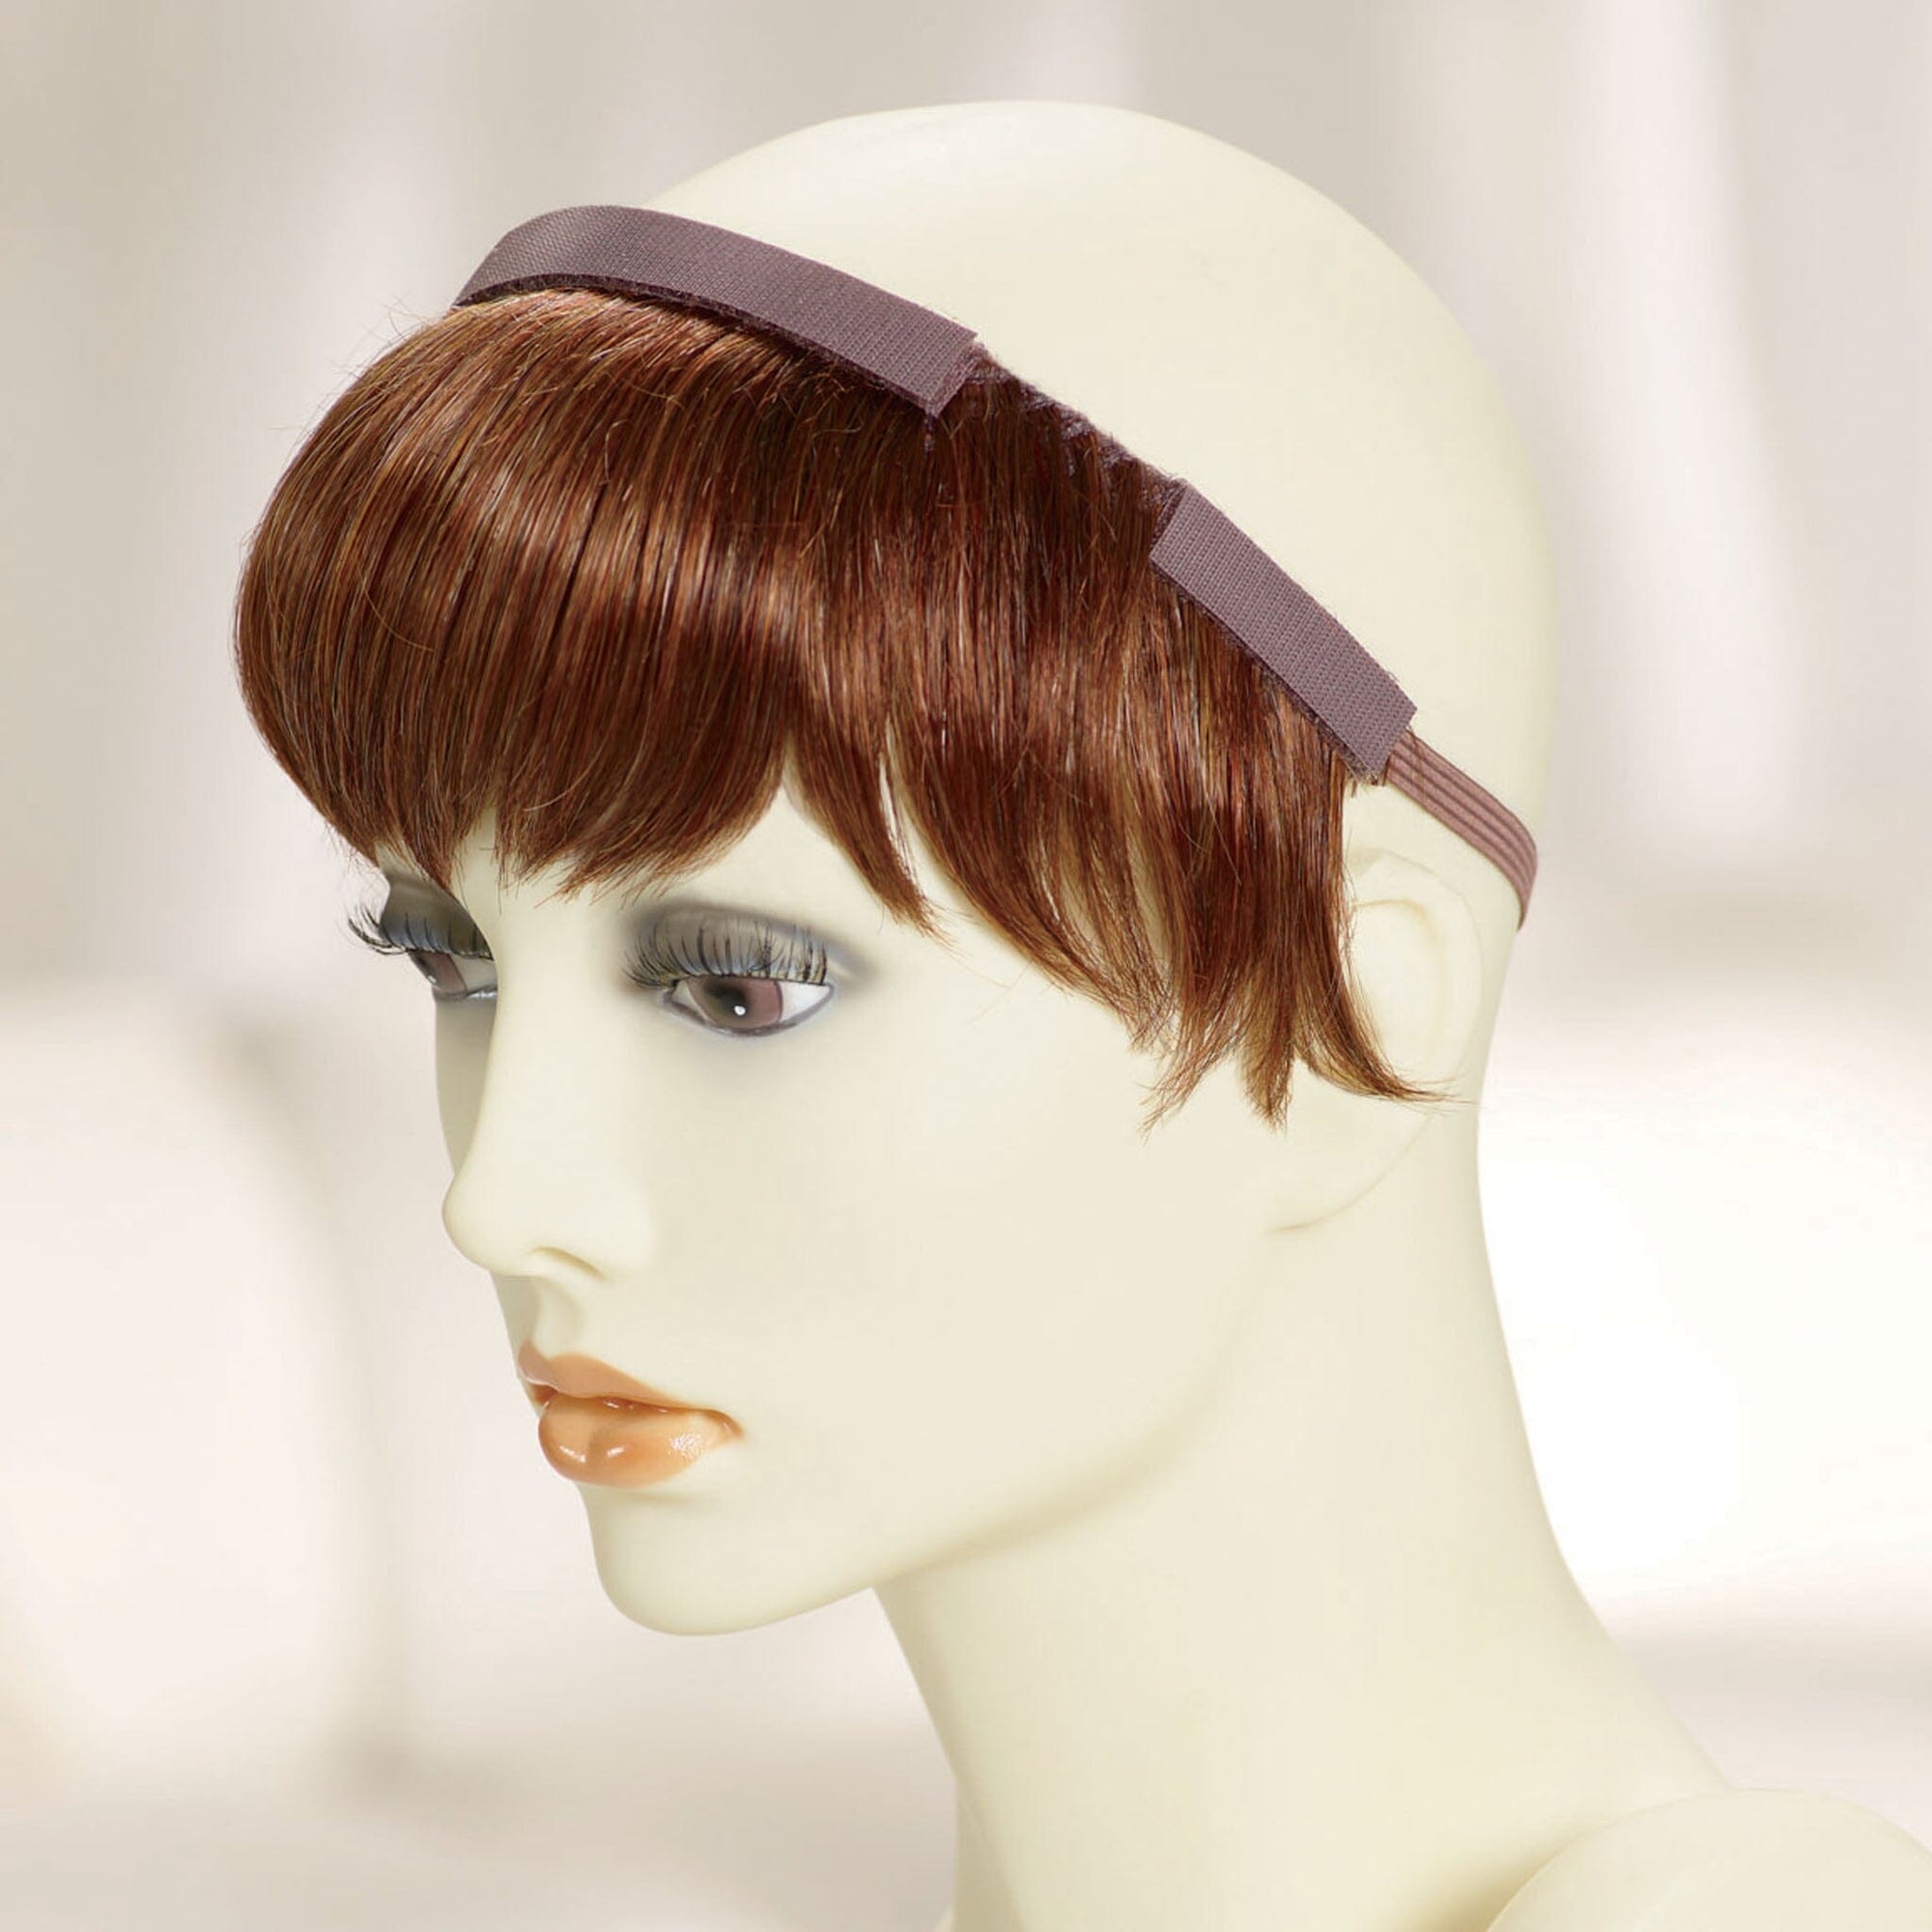 Add-a-Bangs can also be worn straight in the back.